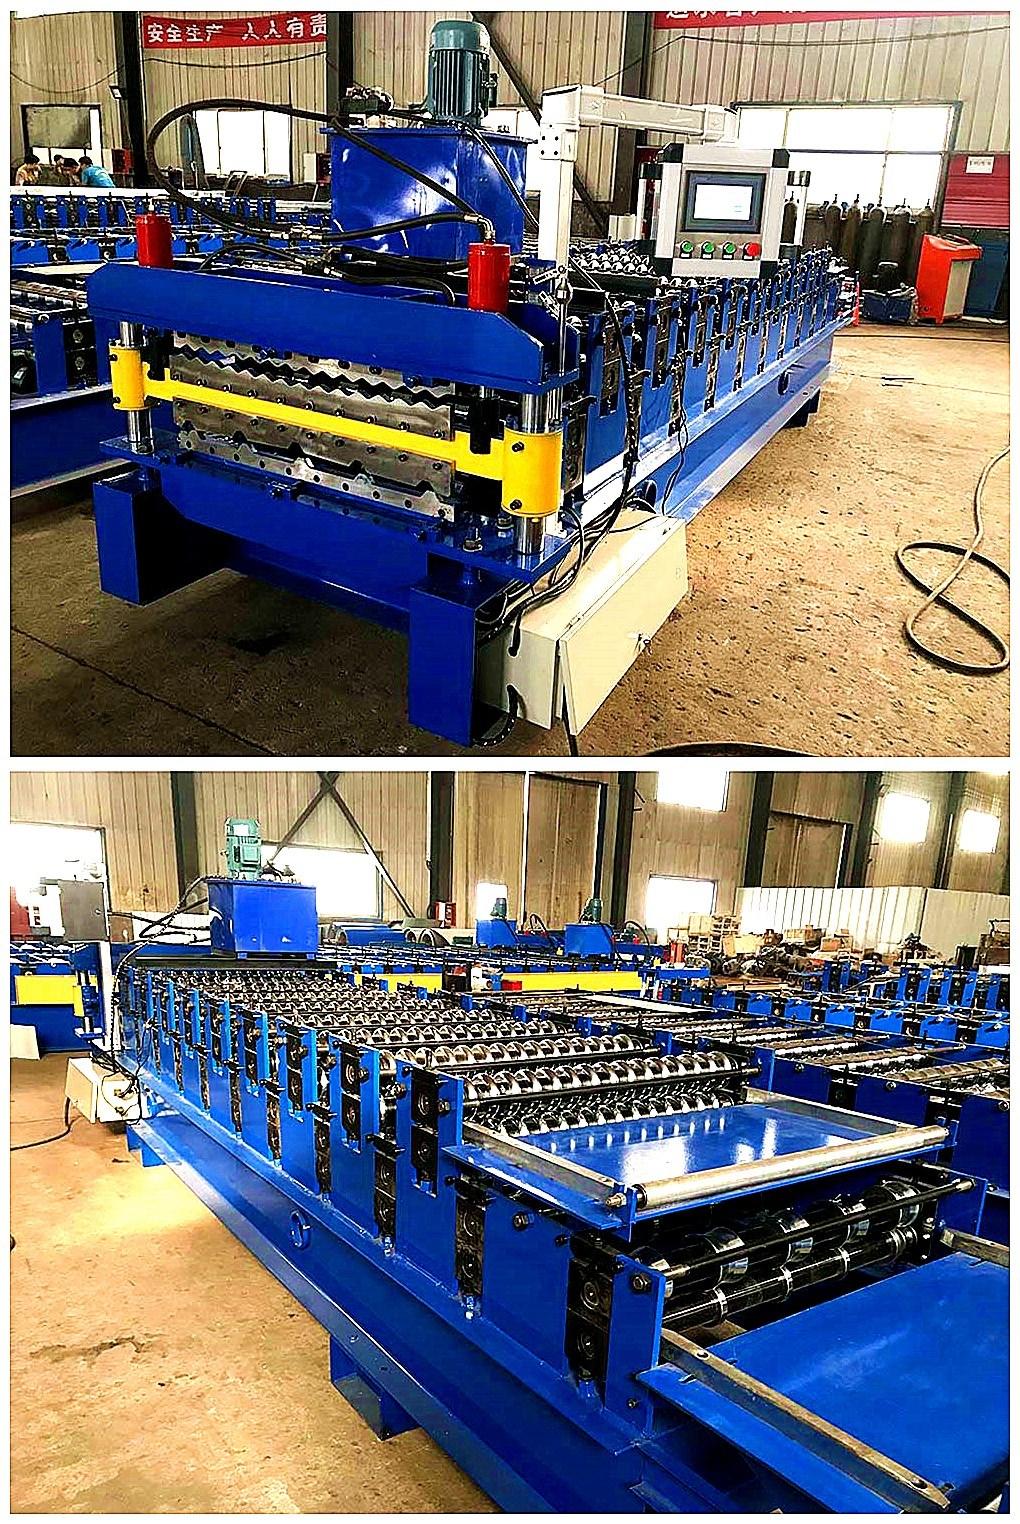 Colour Coated Roofing Sheets Machine India